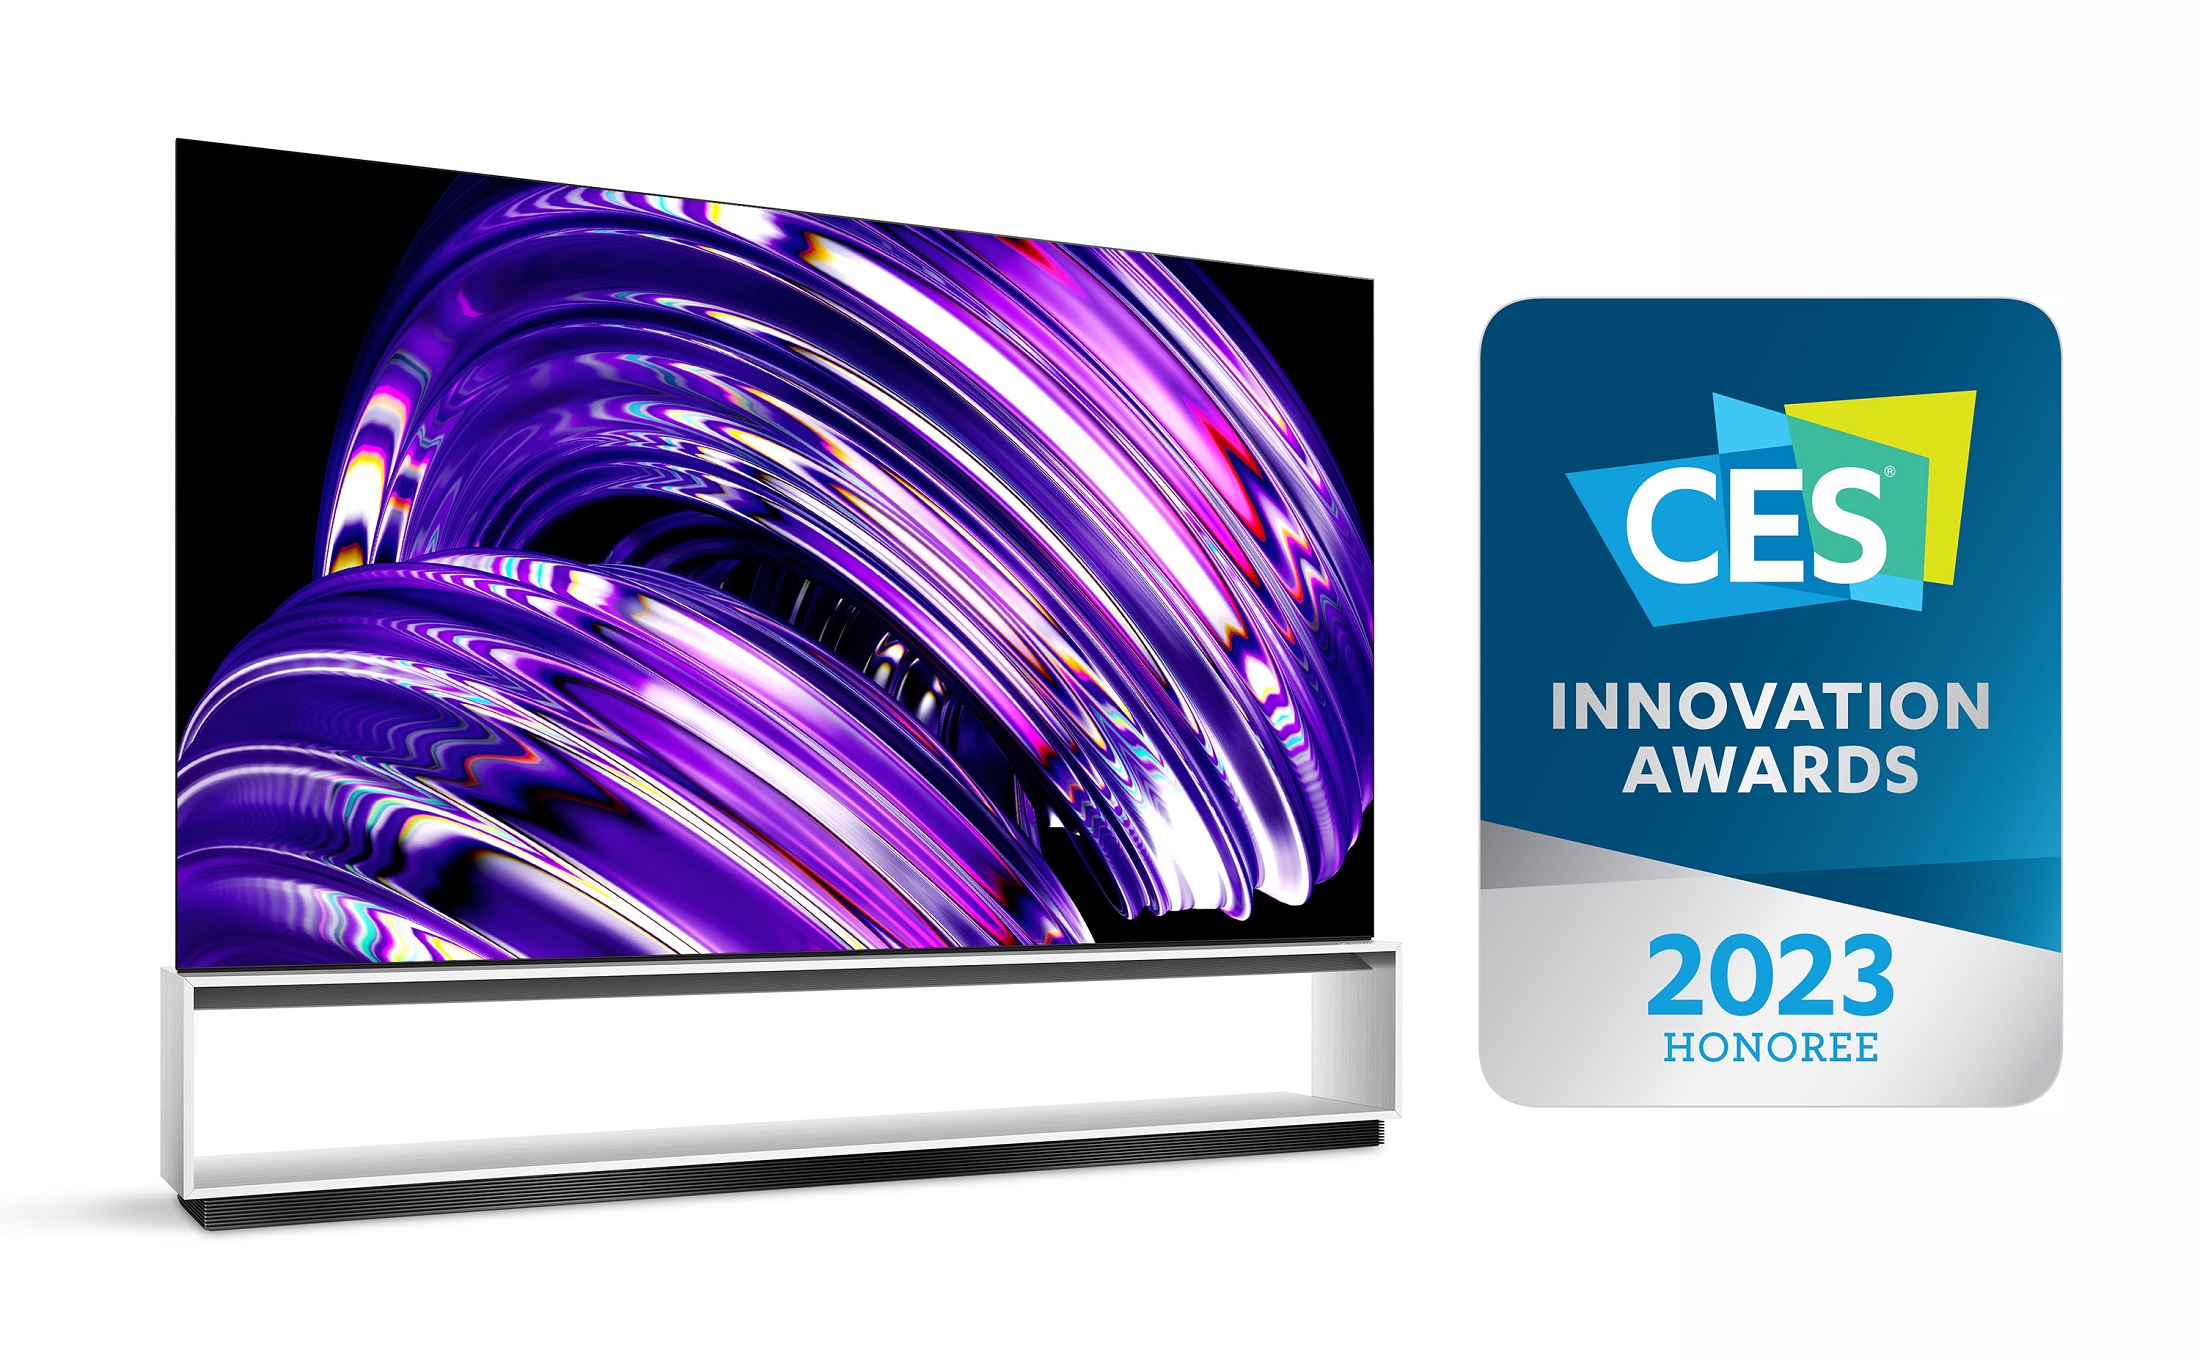 CES 2023 Innovation Awards Honoree logo placed next to LG OLED R